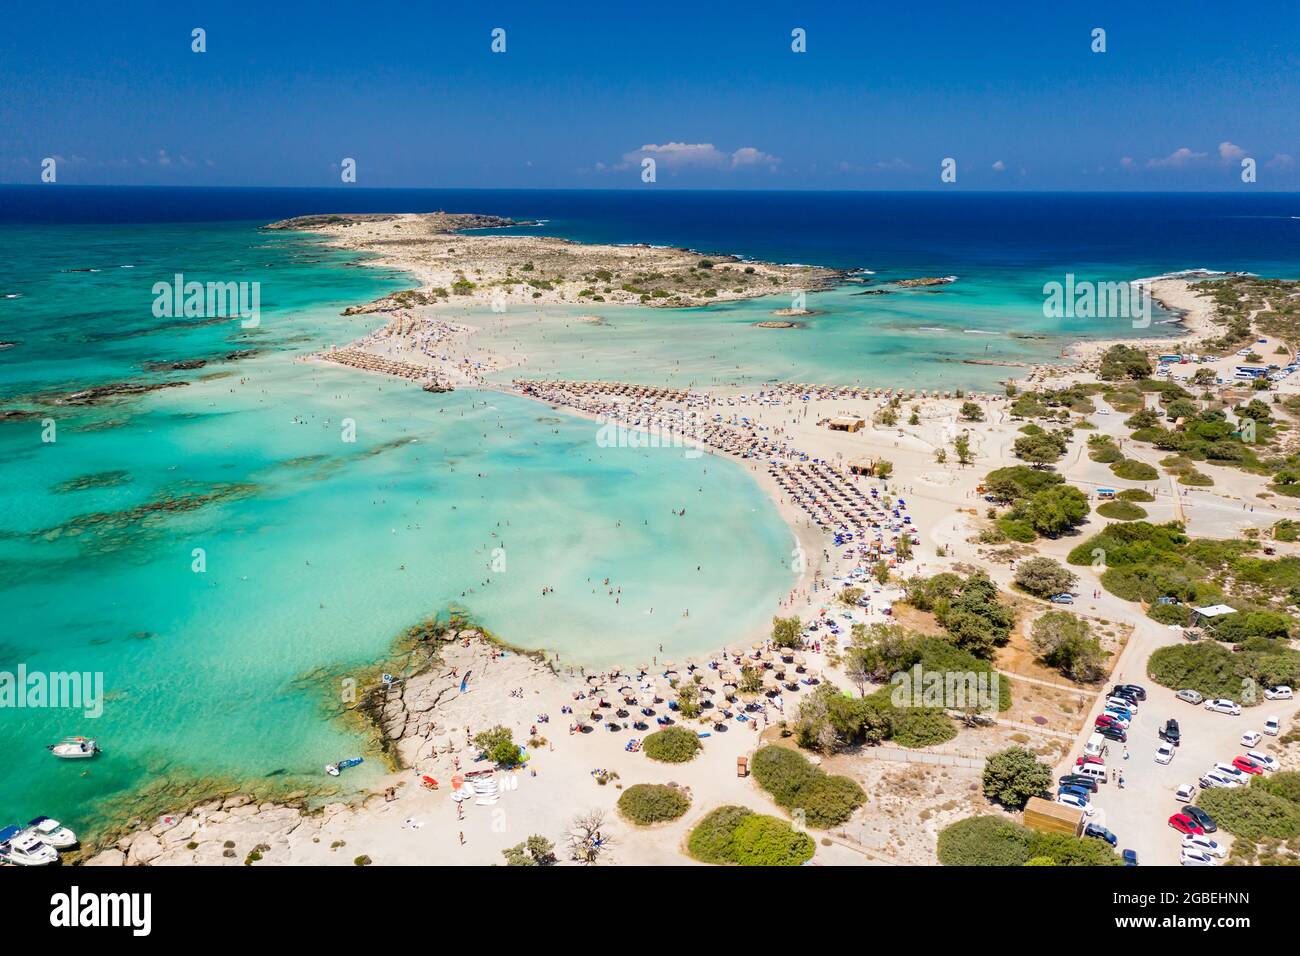 Aerial view of shallow sandy lagoons and a beach surrounded by deeper dark blue sea (Elafonissi Beach) Stock Photo